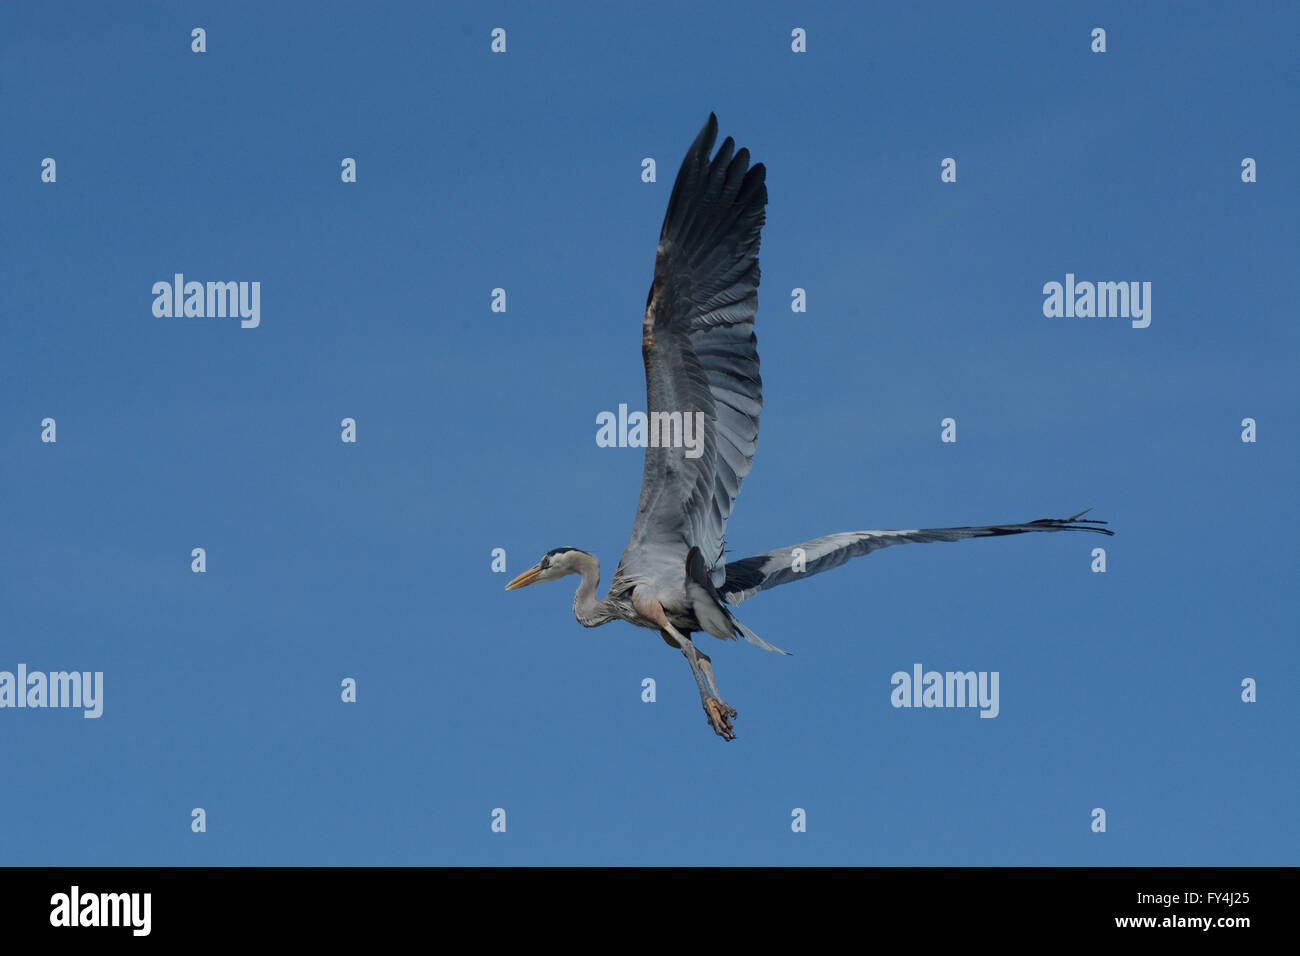 Great Blue Heron flying in blue sky Stock Photo